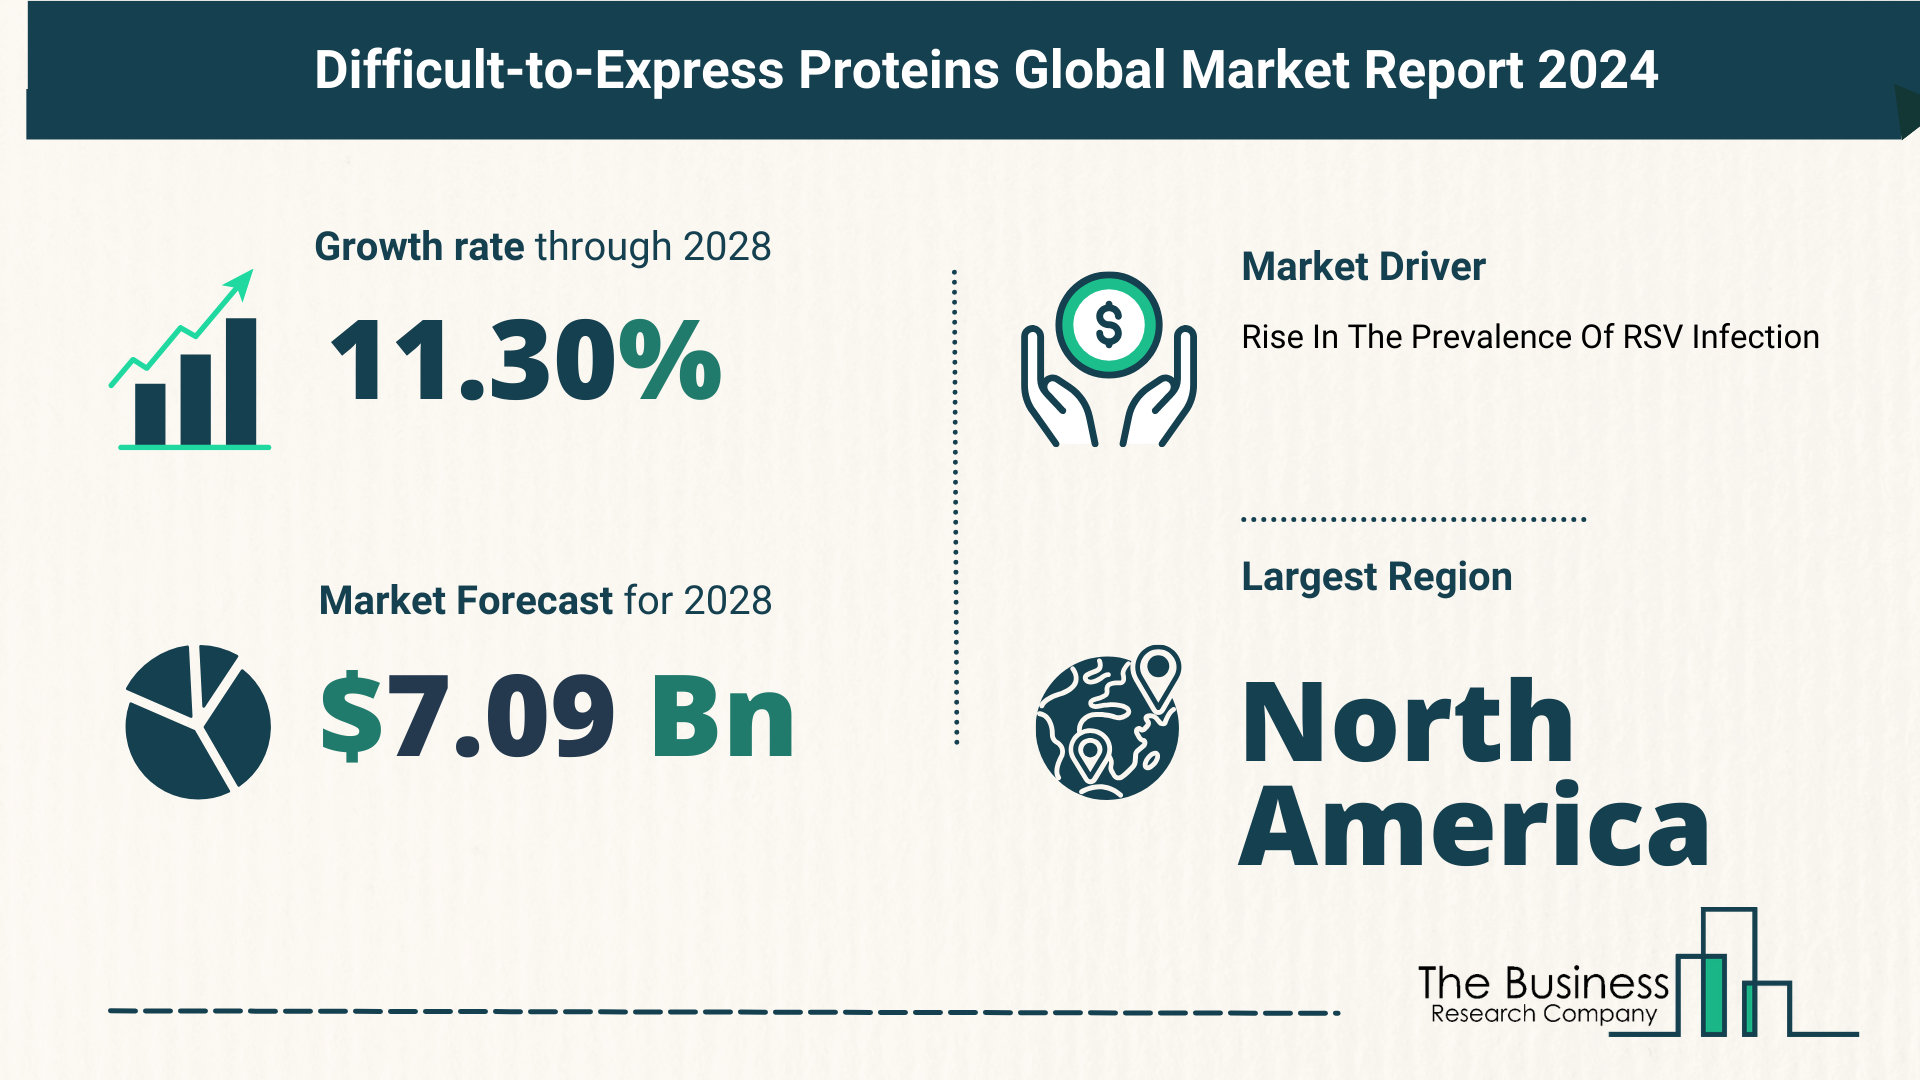 Global Difficult-to-Express Proteins Market